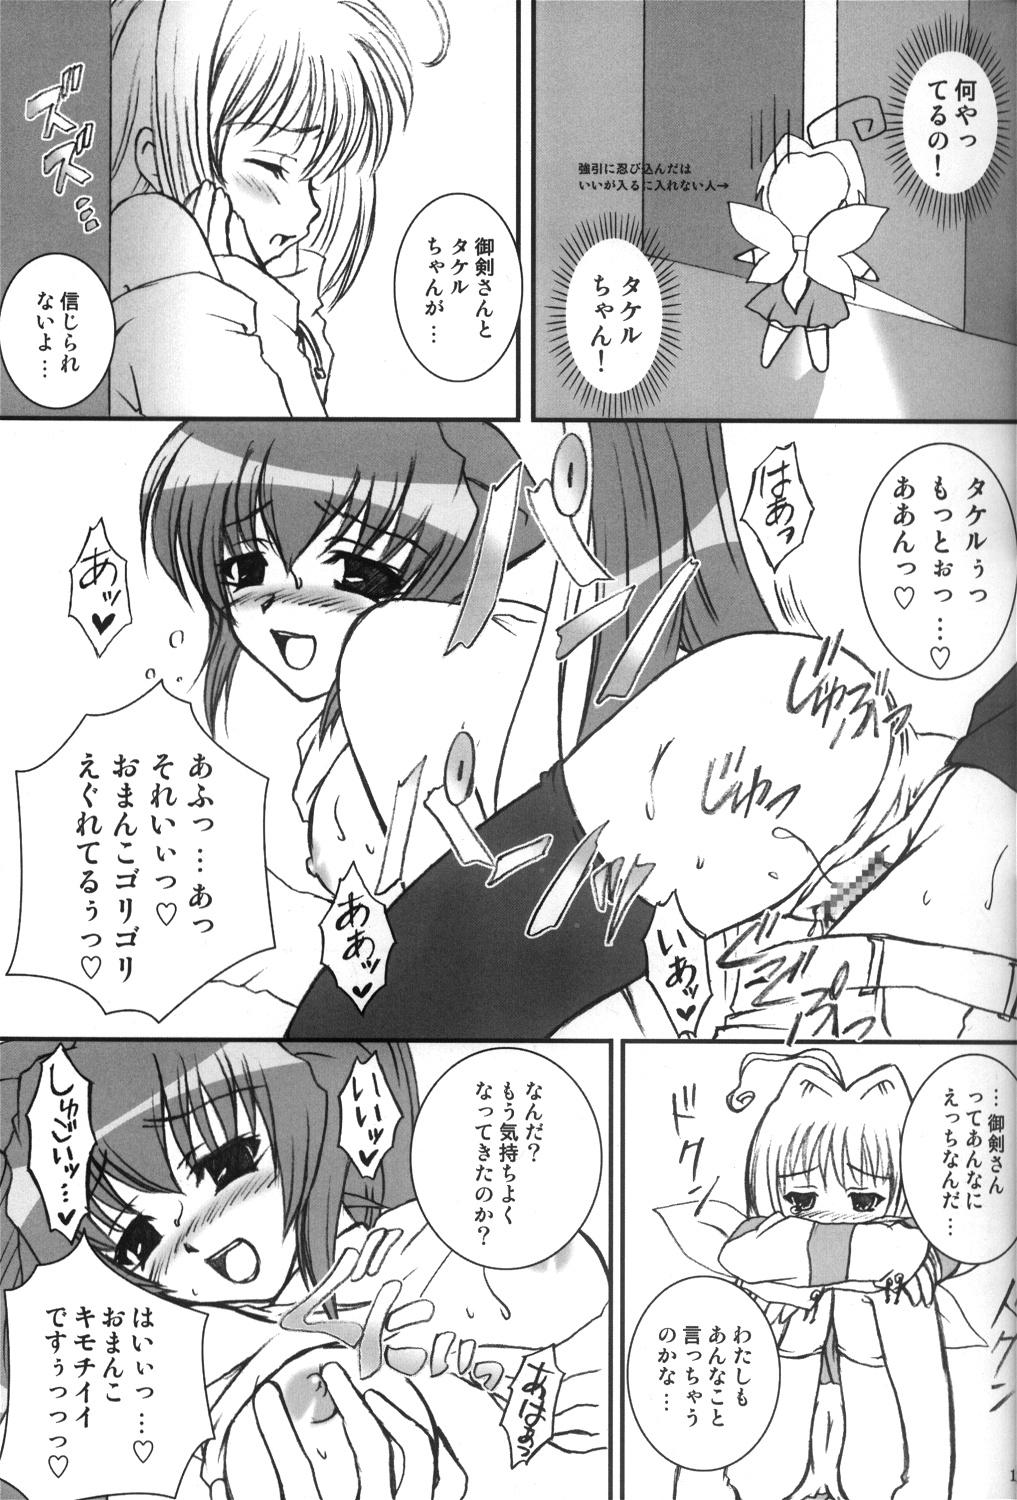 Porn Star I have fallen in love with you... - Muv-luv High Definition - Page 12